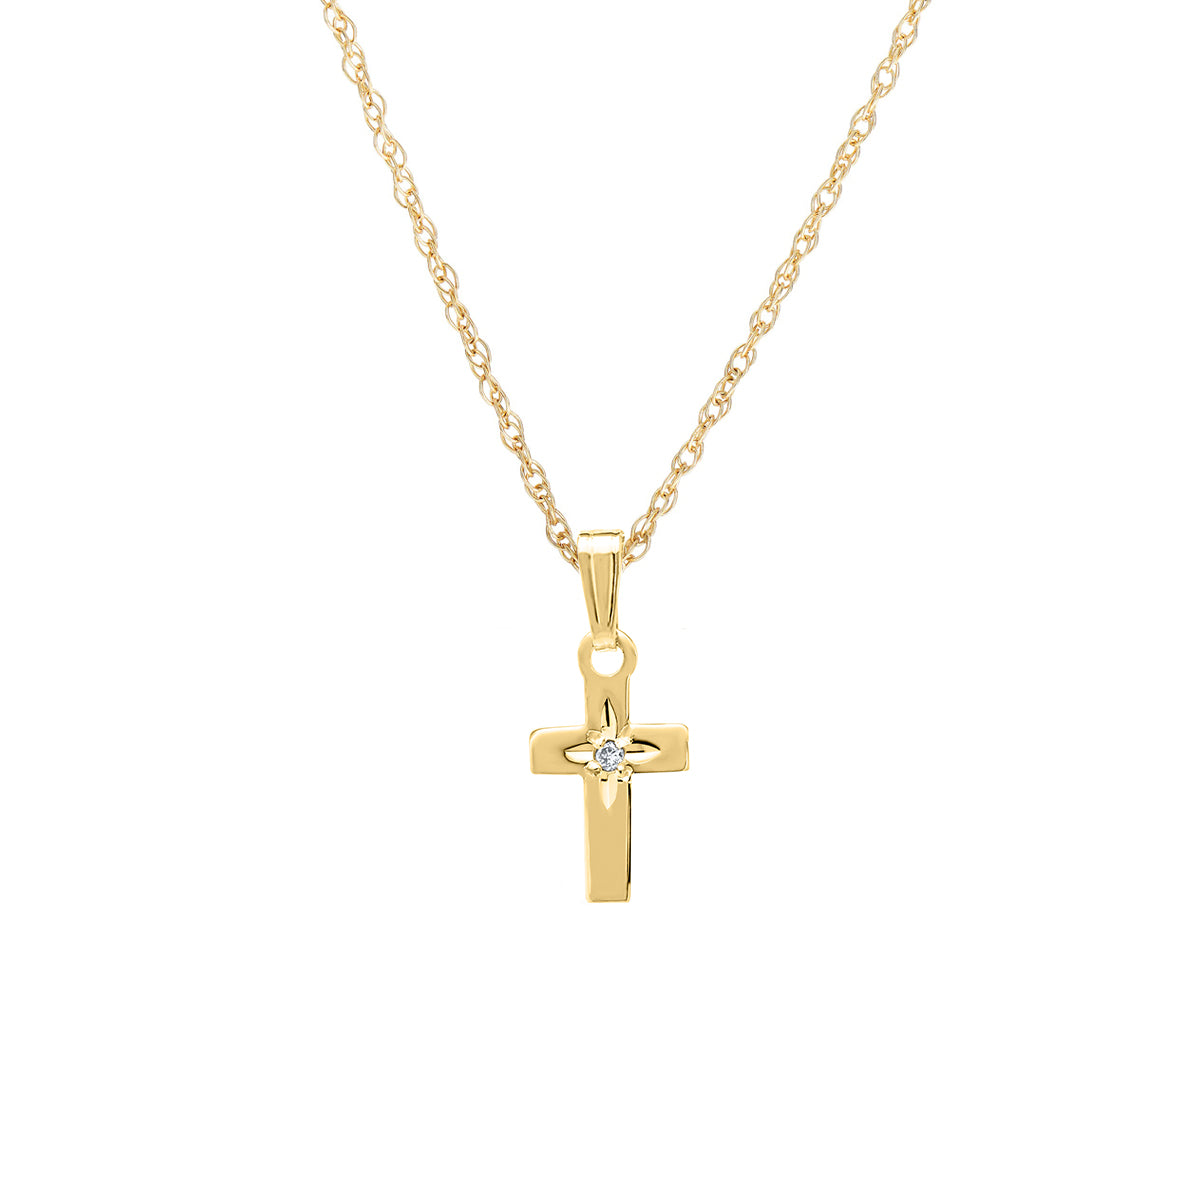 Infant's Cross - Gold/Sterling Silver with 13 inch chain | The Catholic  Company®